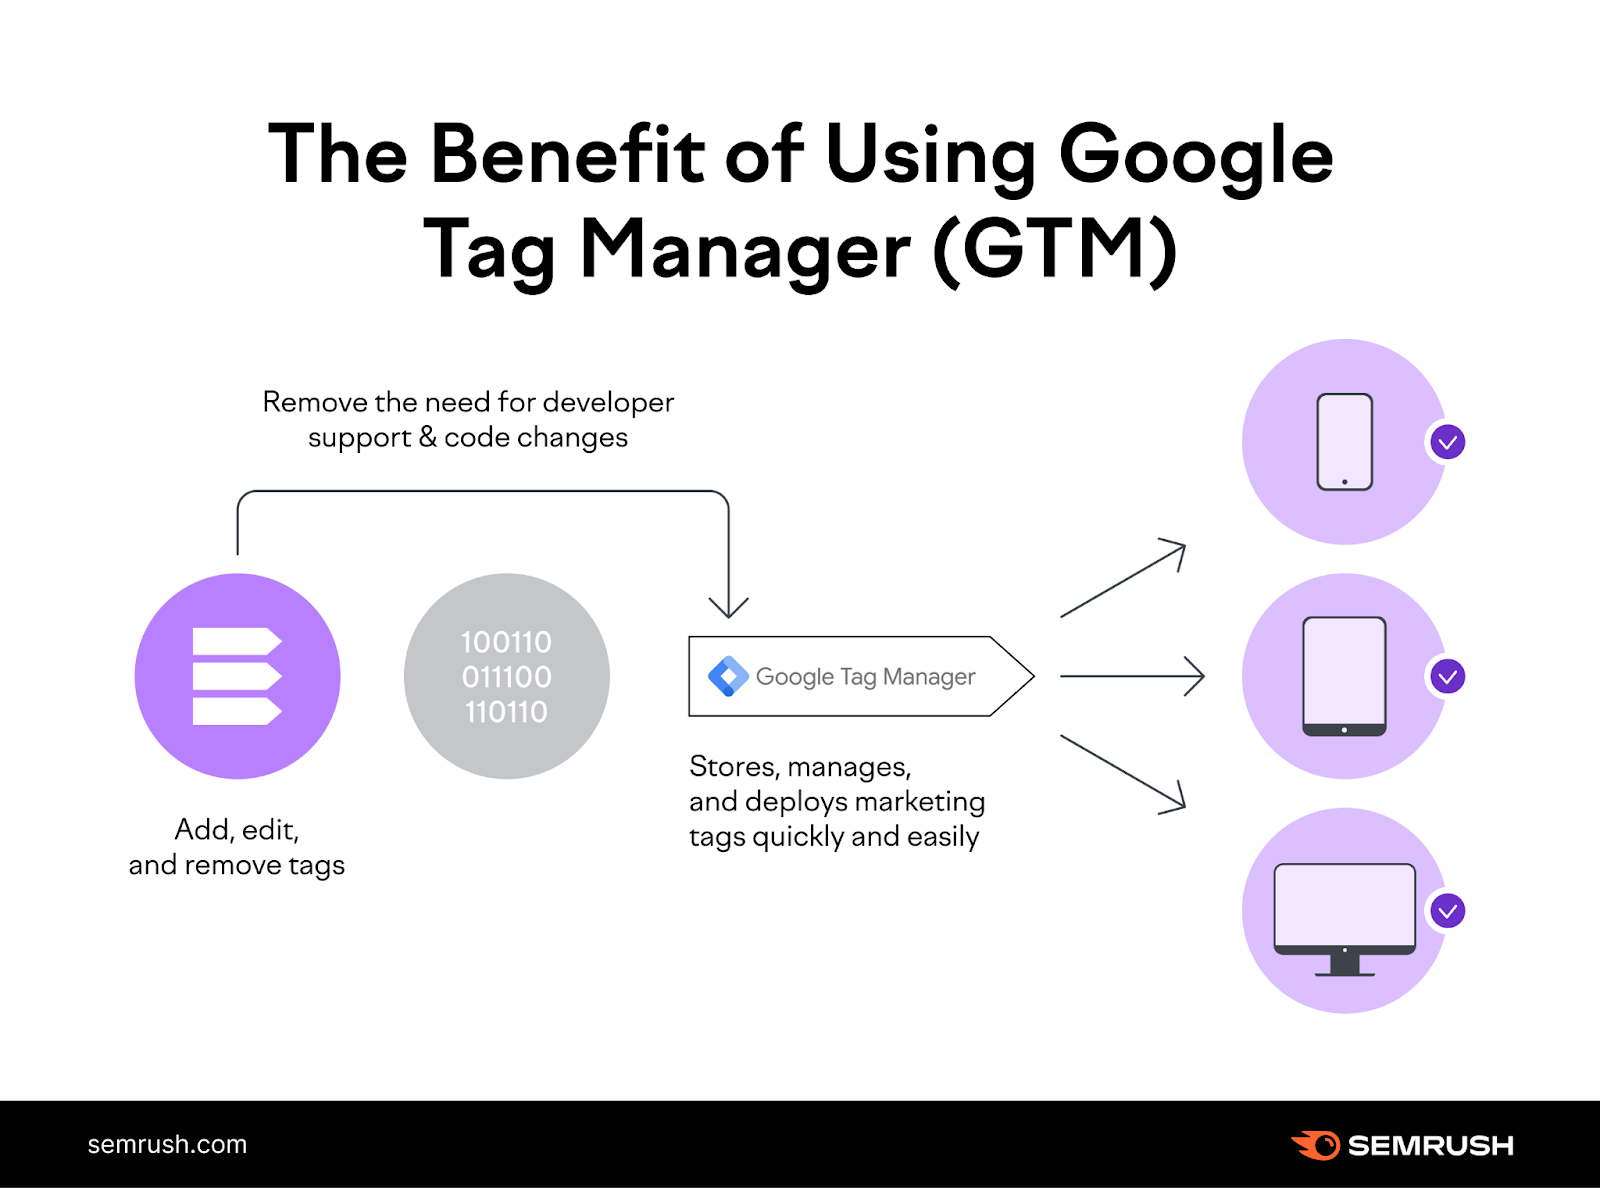 The benefit of using a Google Tag Manager (GTM)